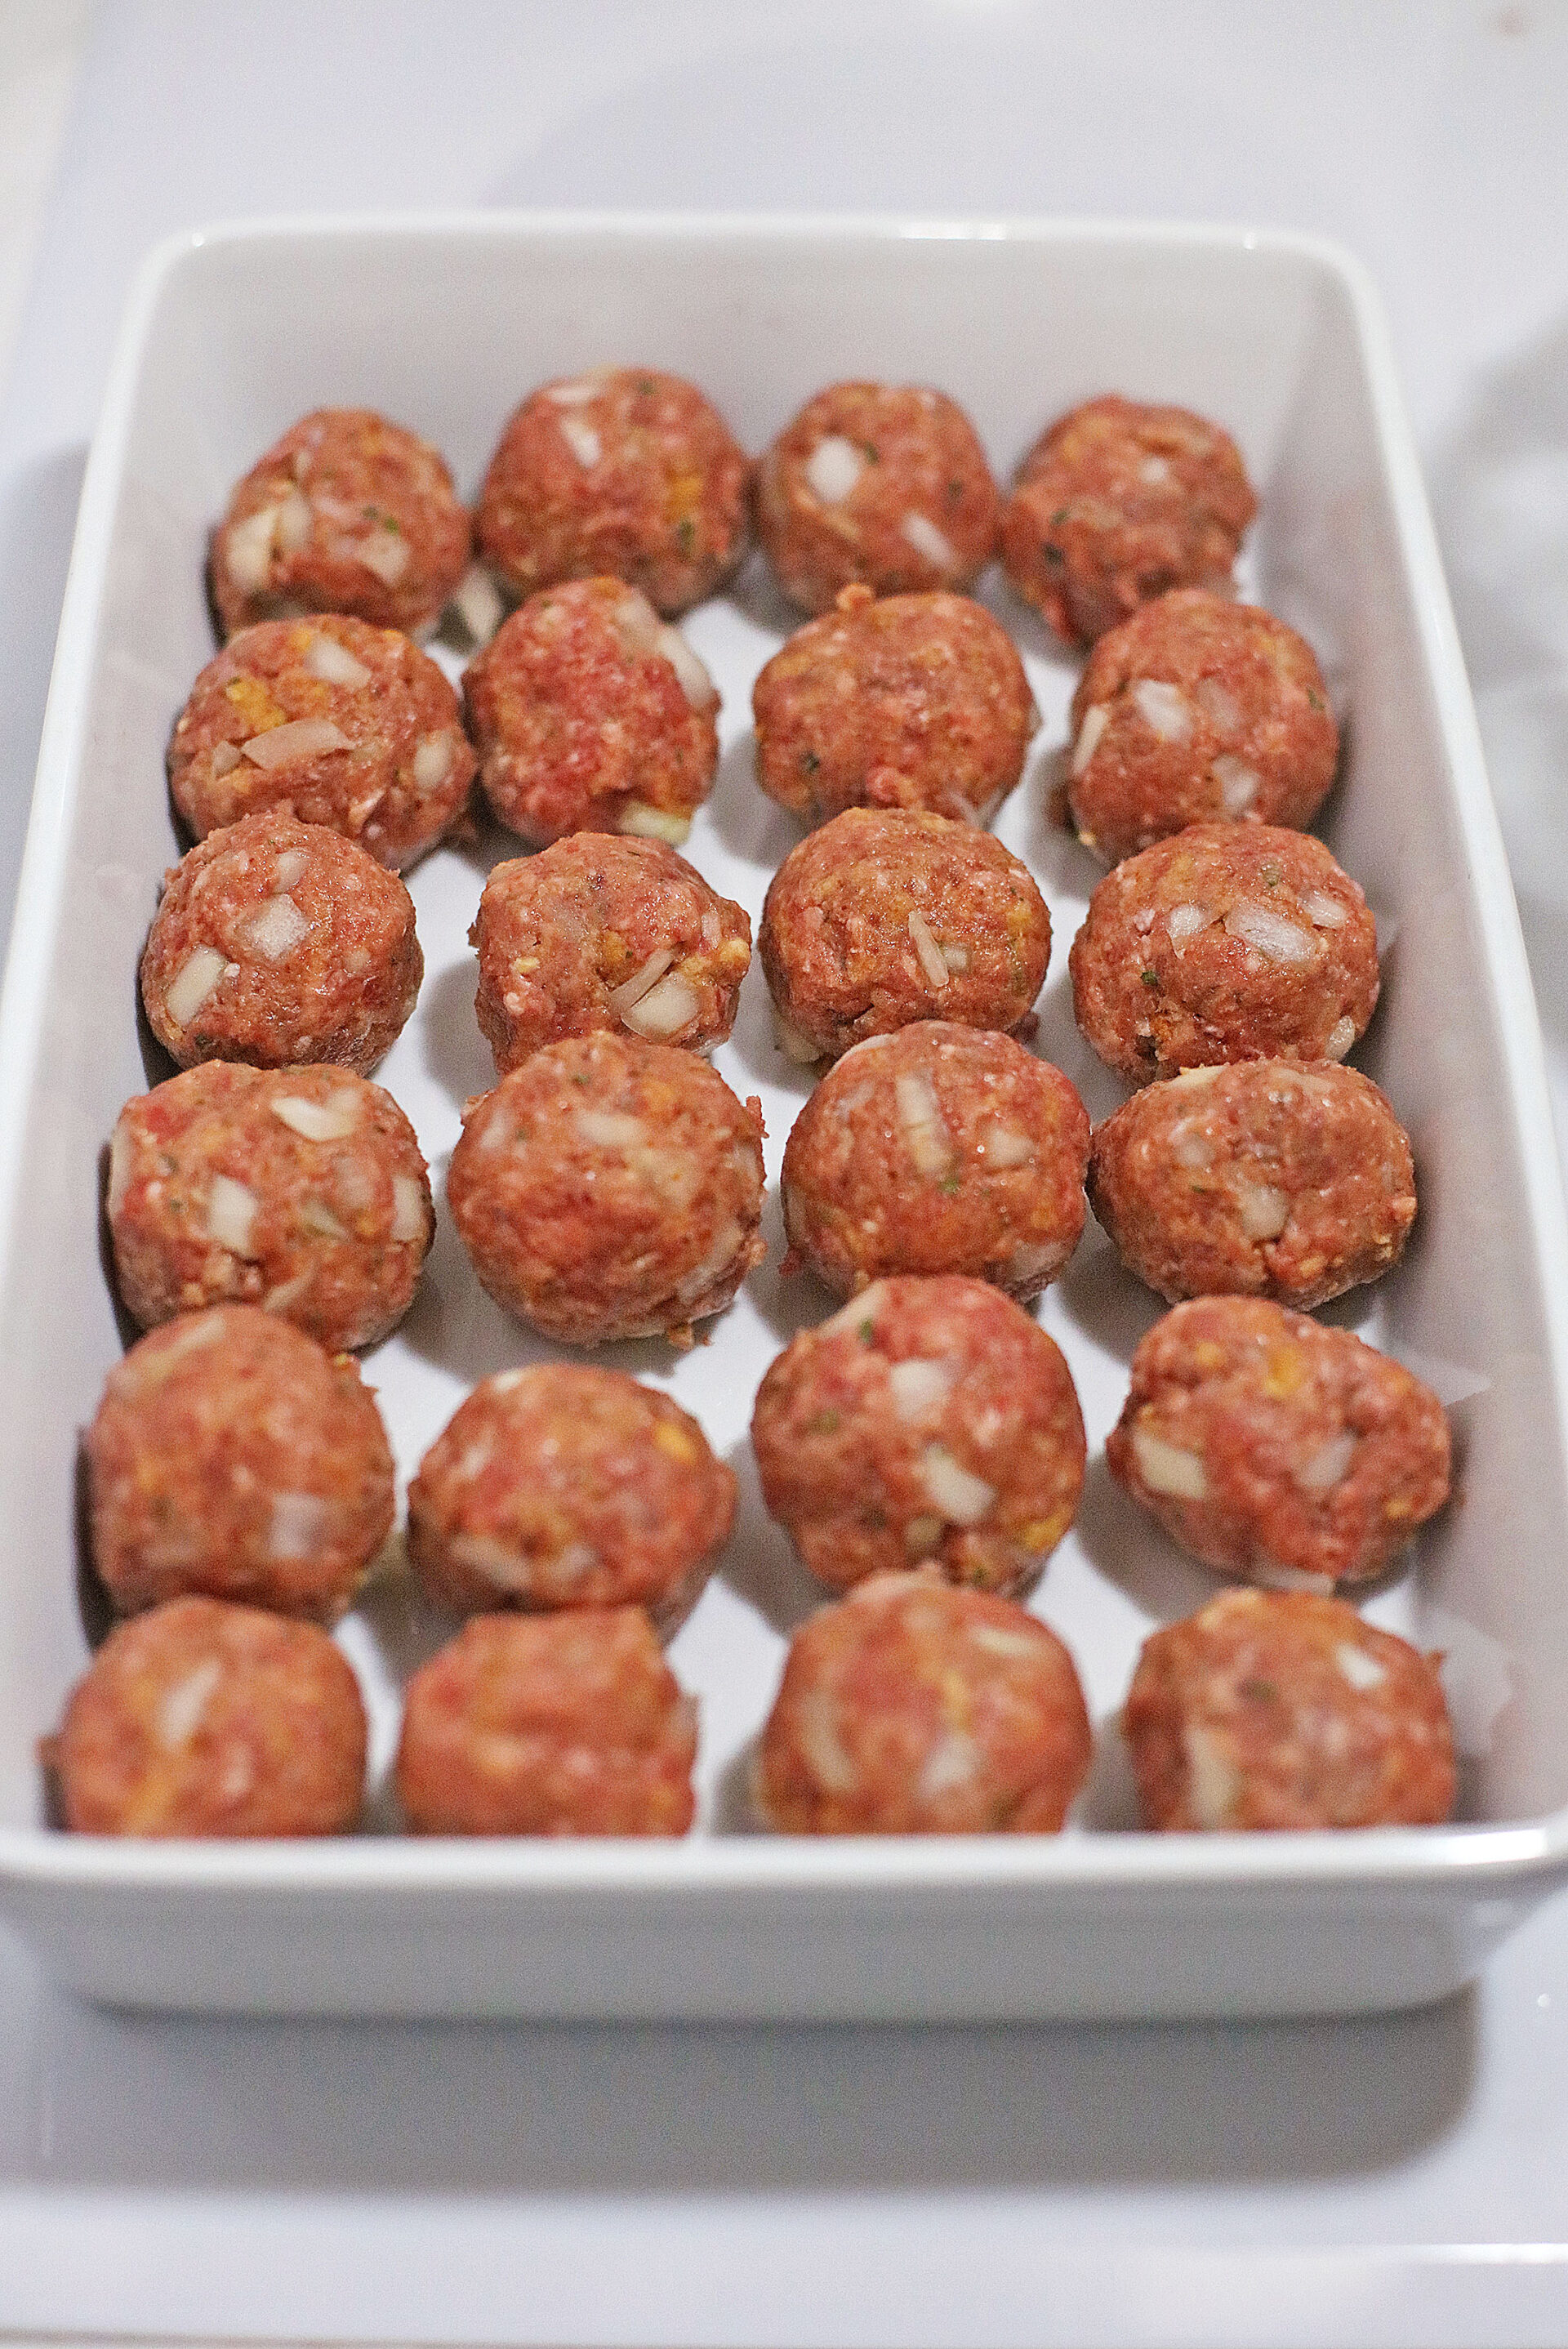 Stove top stuffing meatballs in a baking dish.